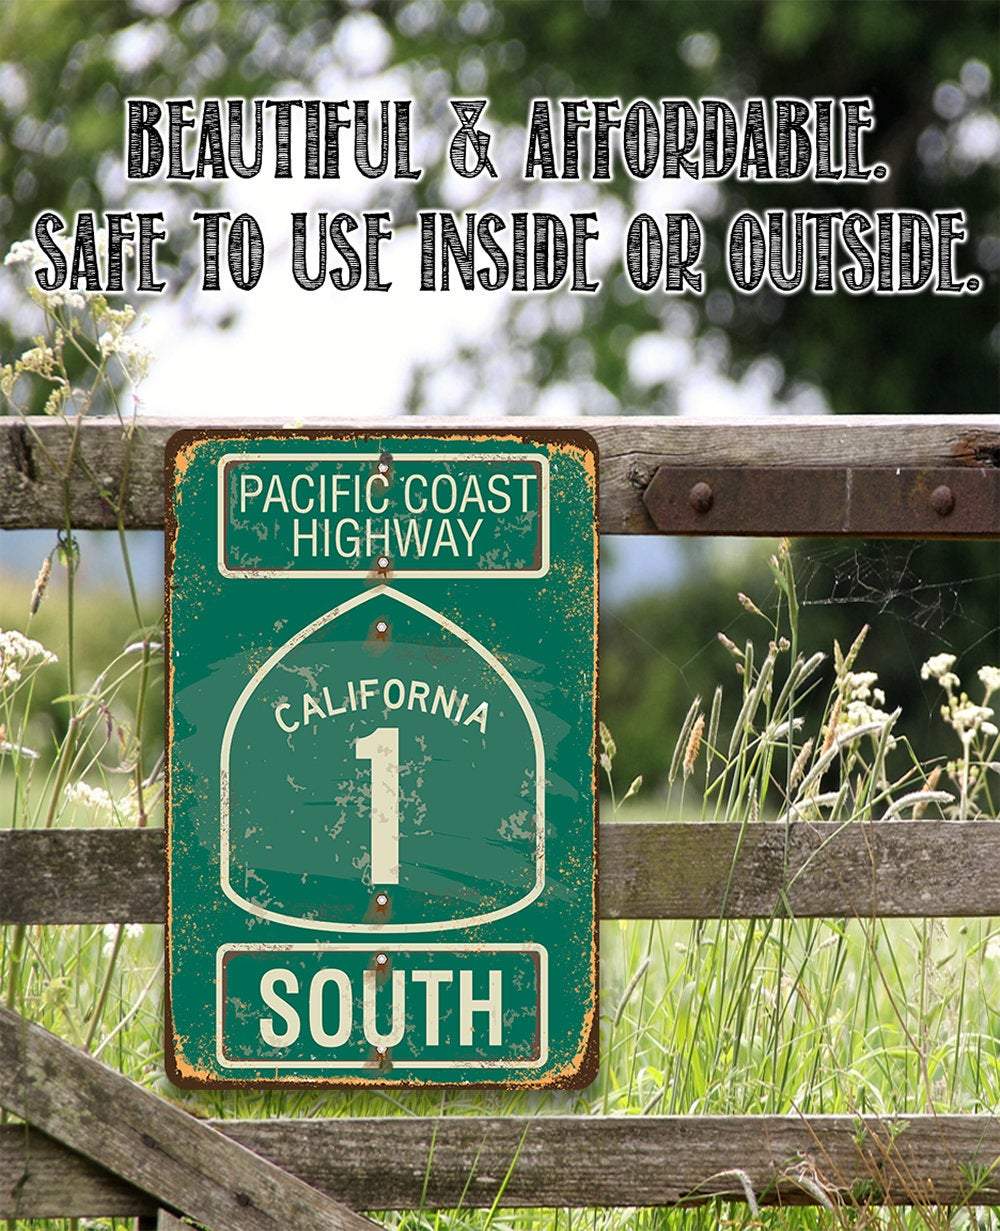 Pacific Coast Highway South - California - Metal Sign | Lone Star Art.